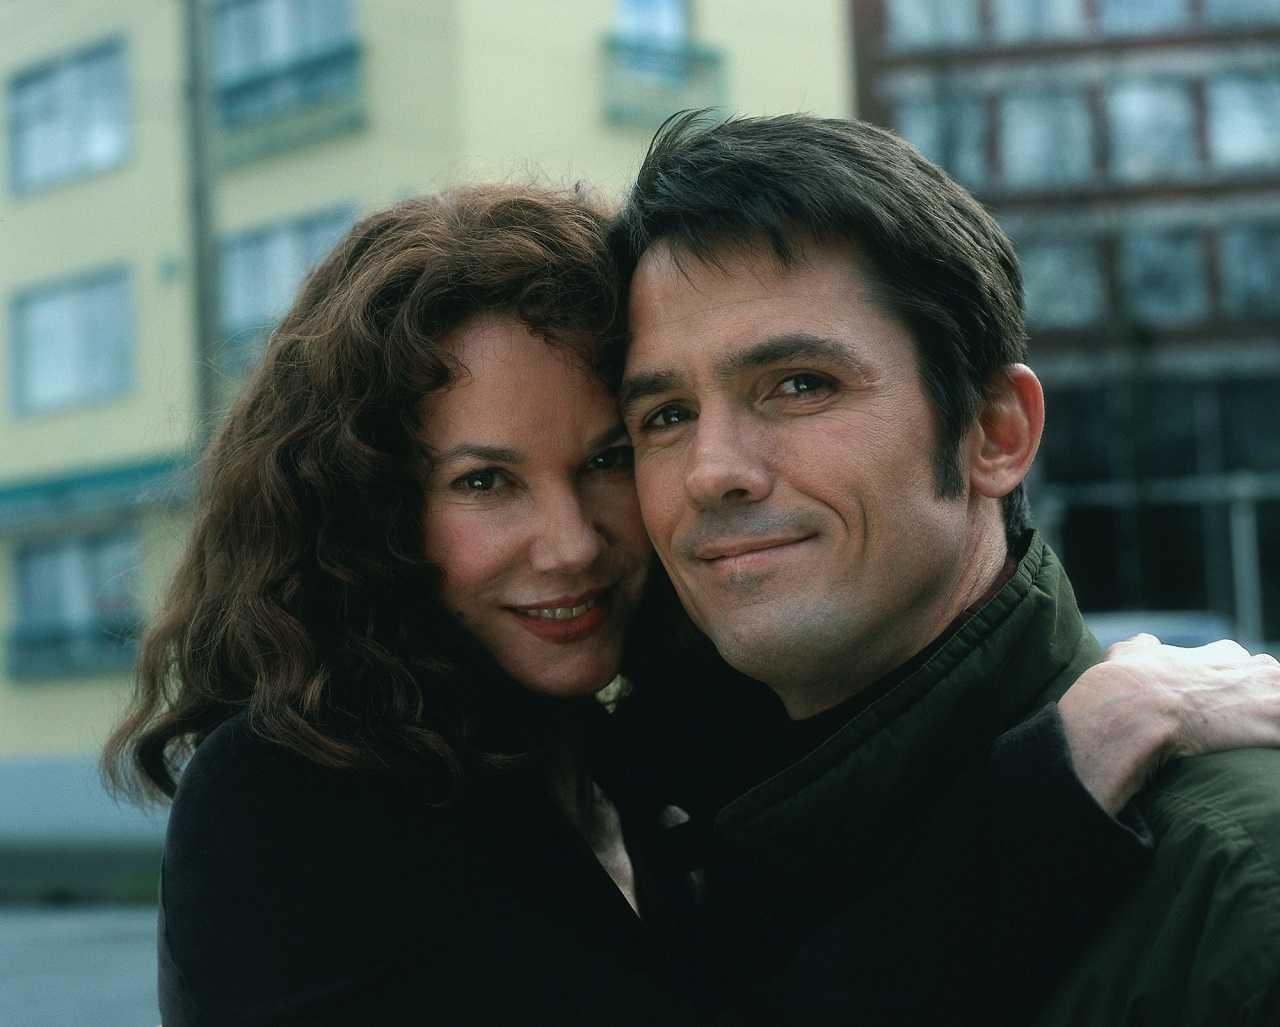 Ann Rule (Barbara Hershey) and Ted Bundy (Billy Campbell) in The Stranger Beside Me (2003)